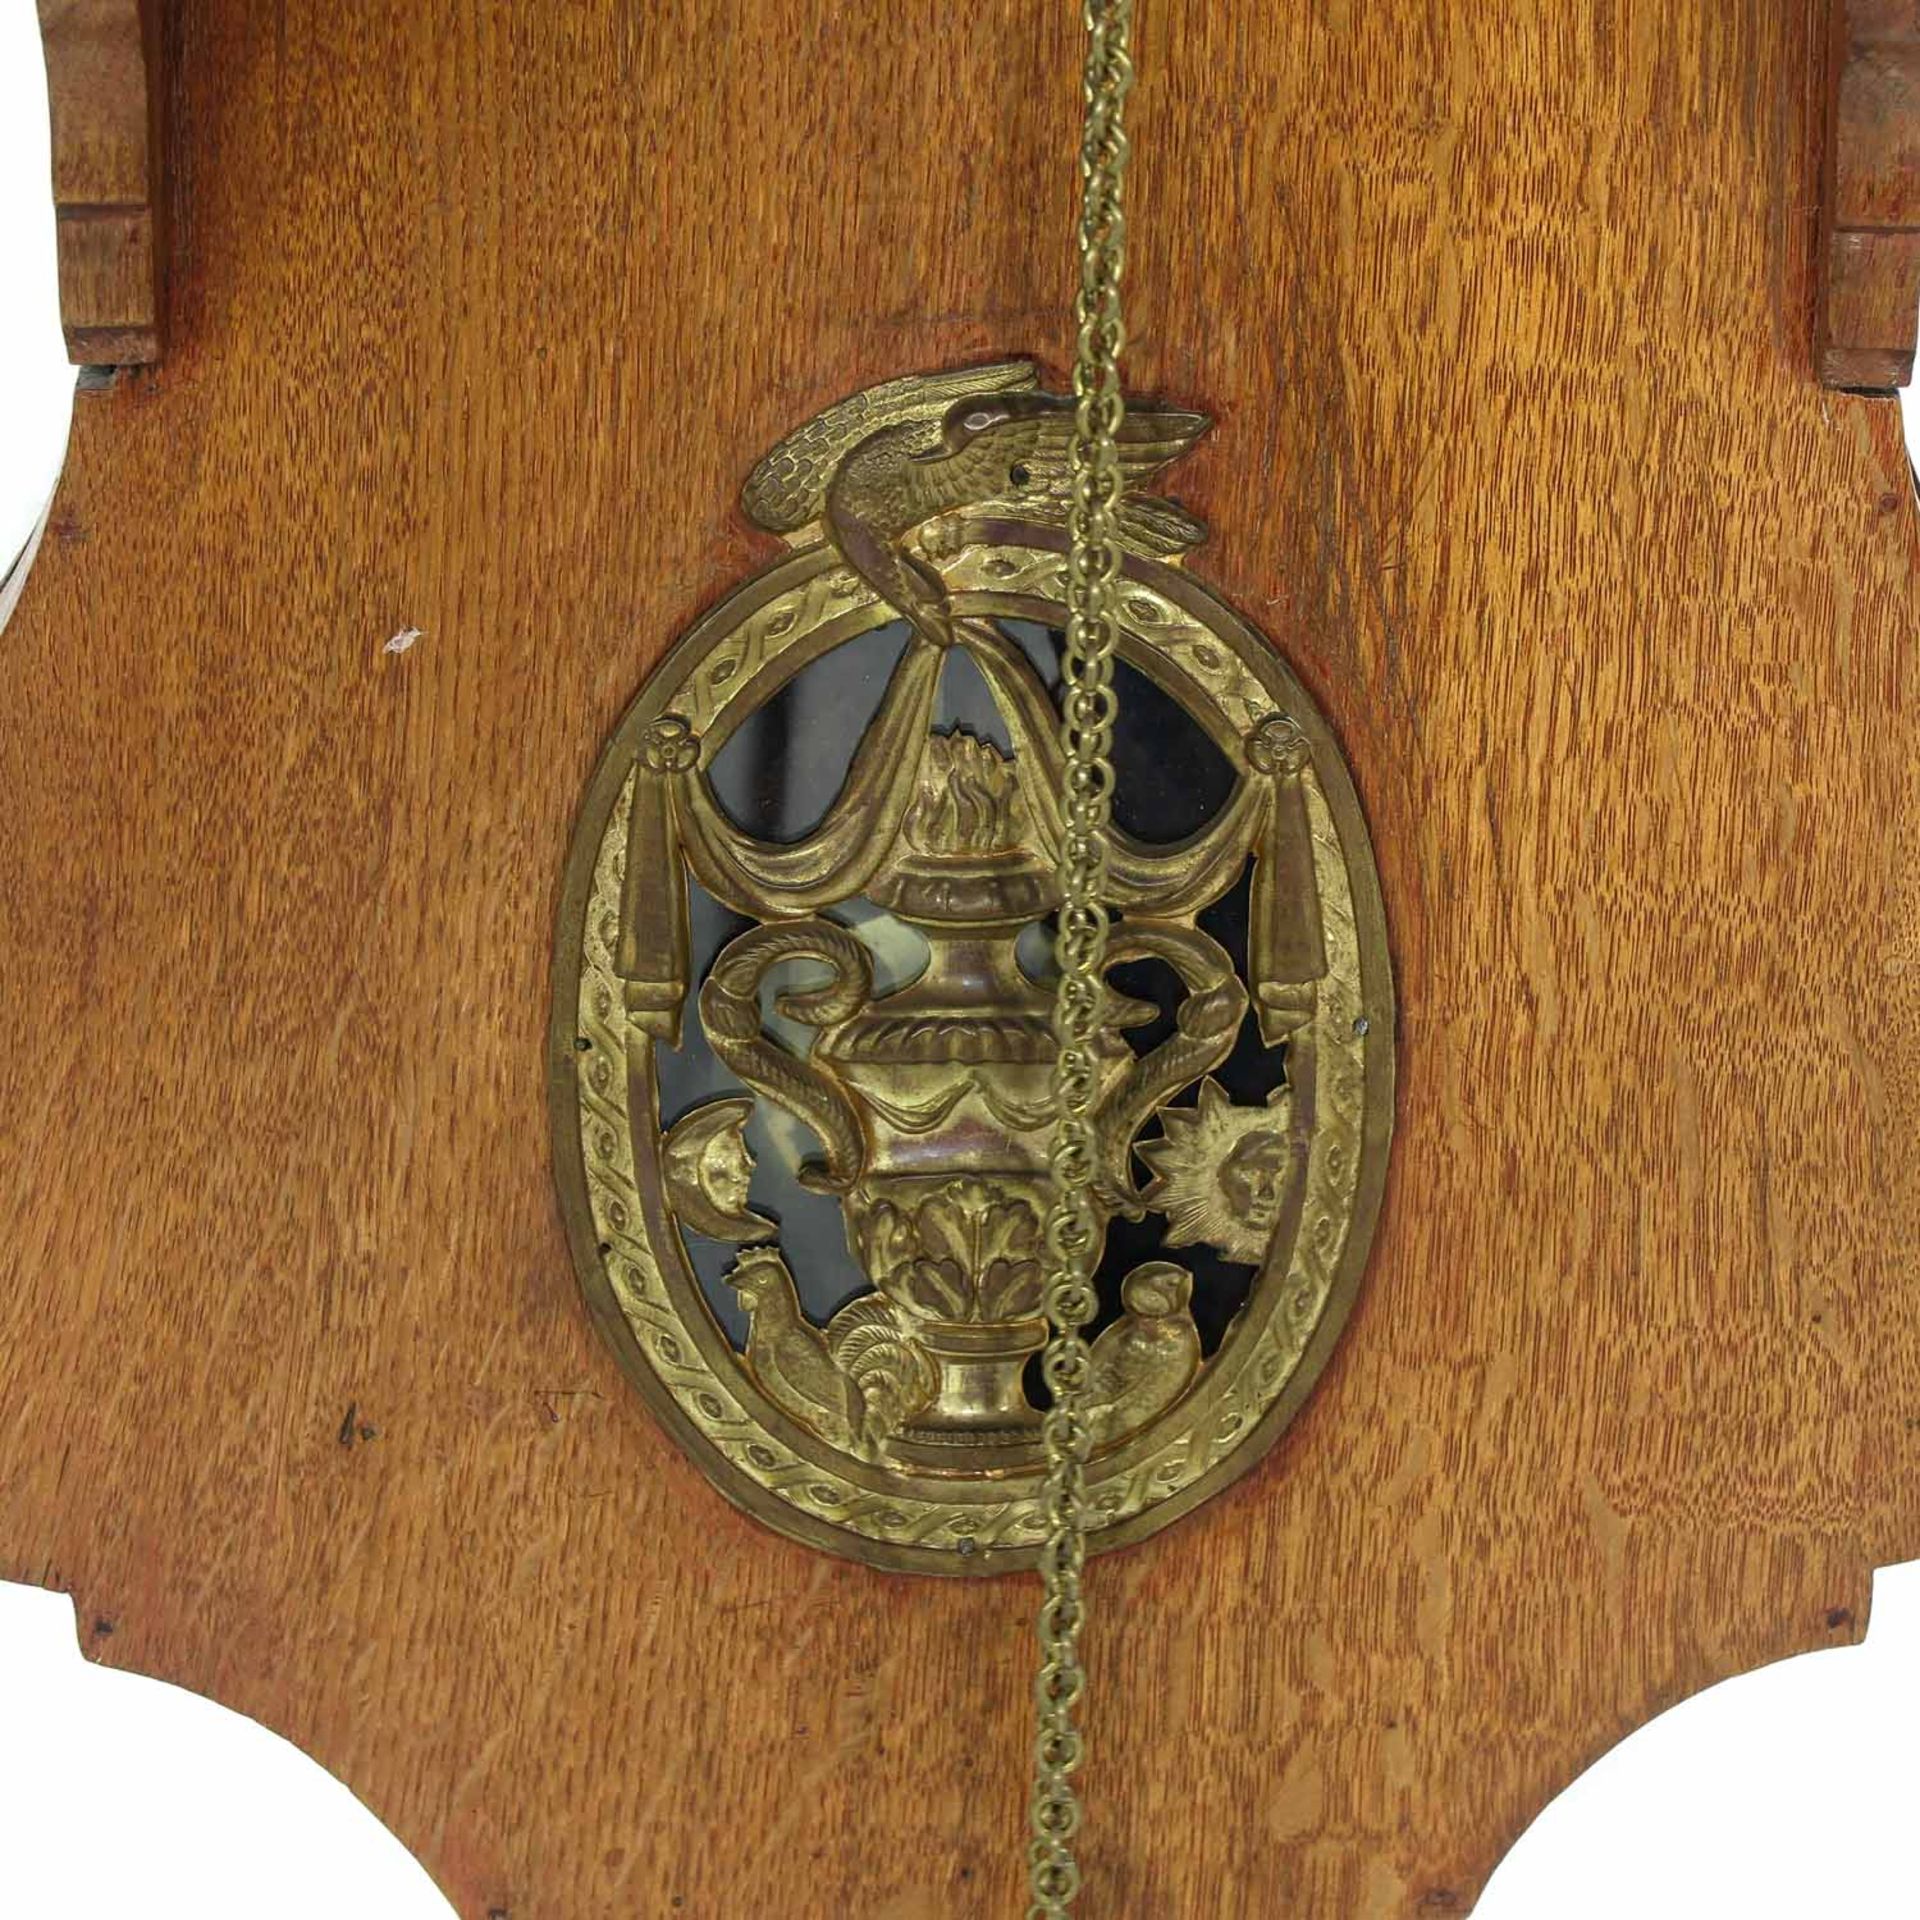 A 19th Century Friesland Wall Clock - Image 10 of 10